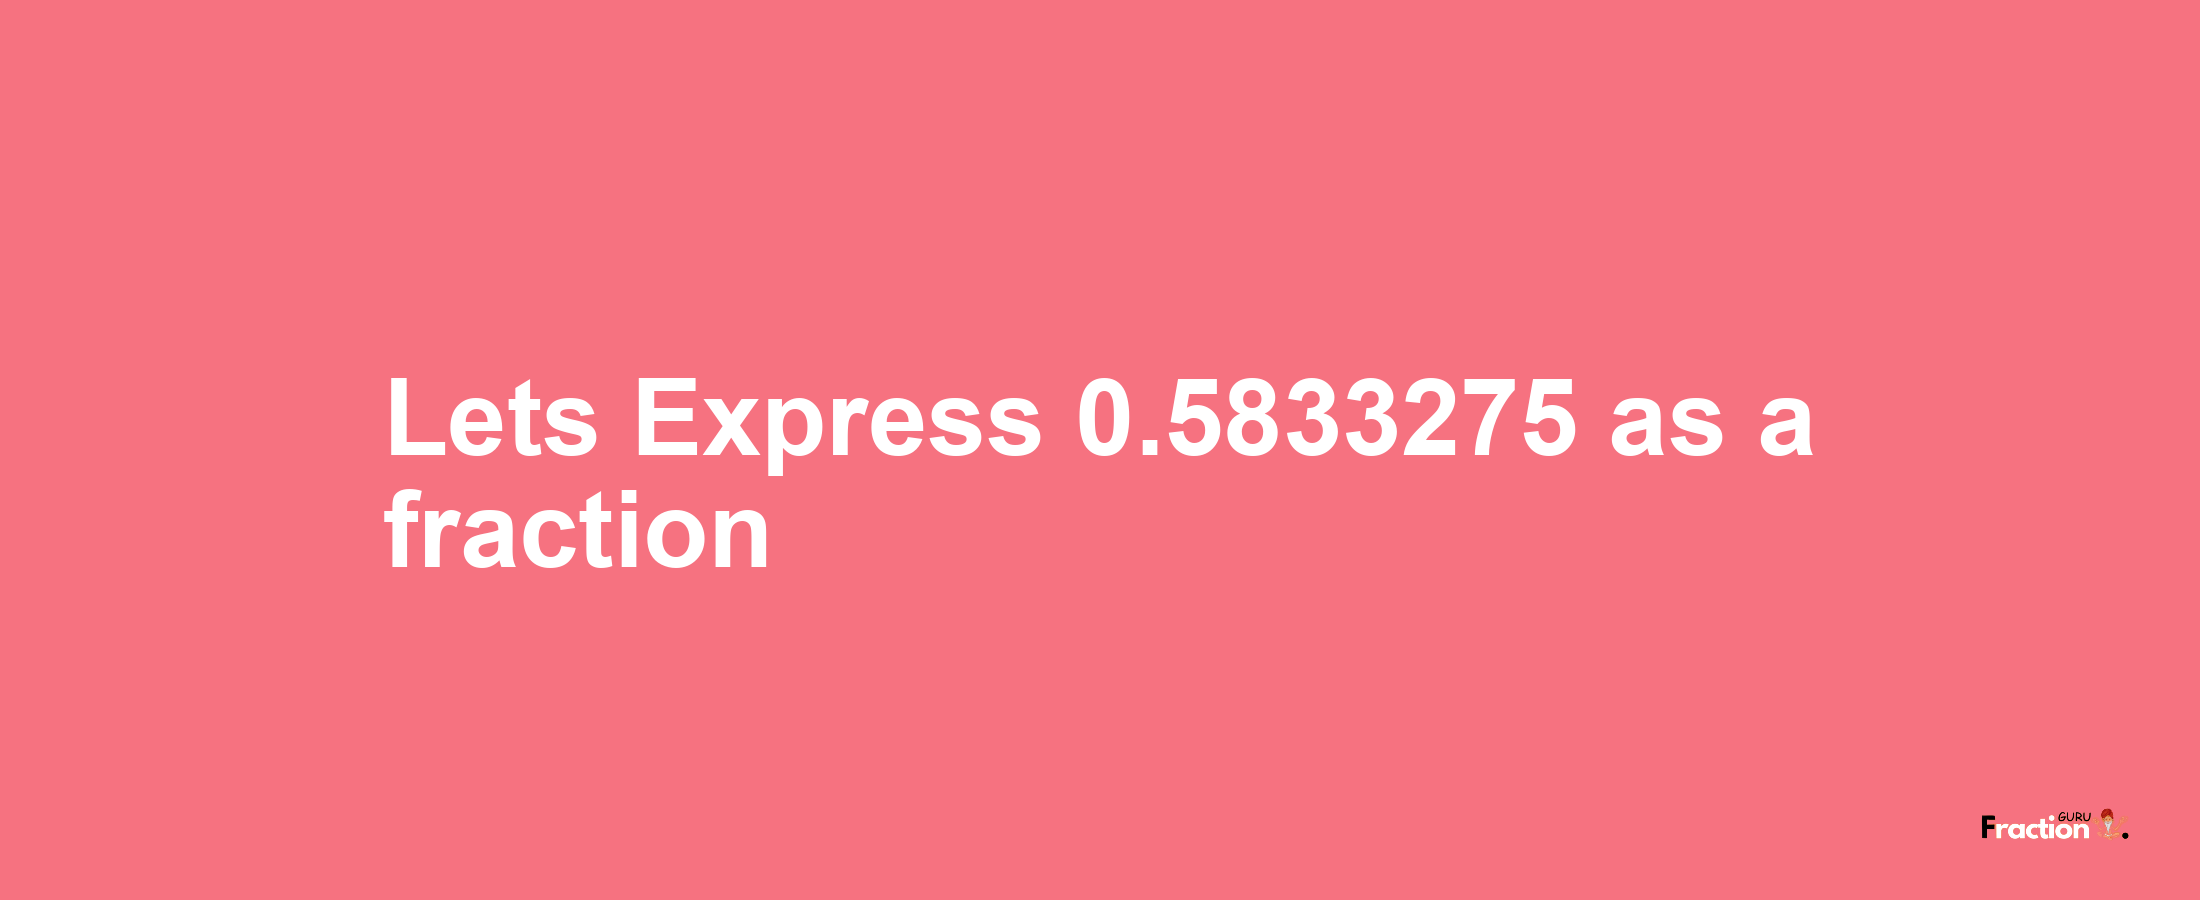 Lets Express 0.5833275 as afraction